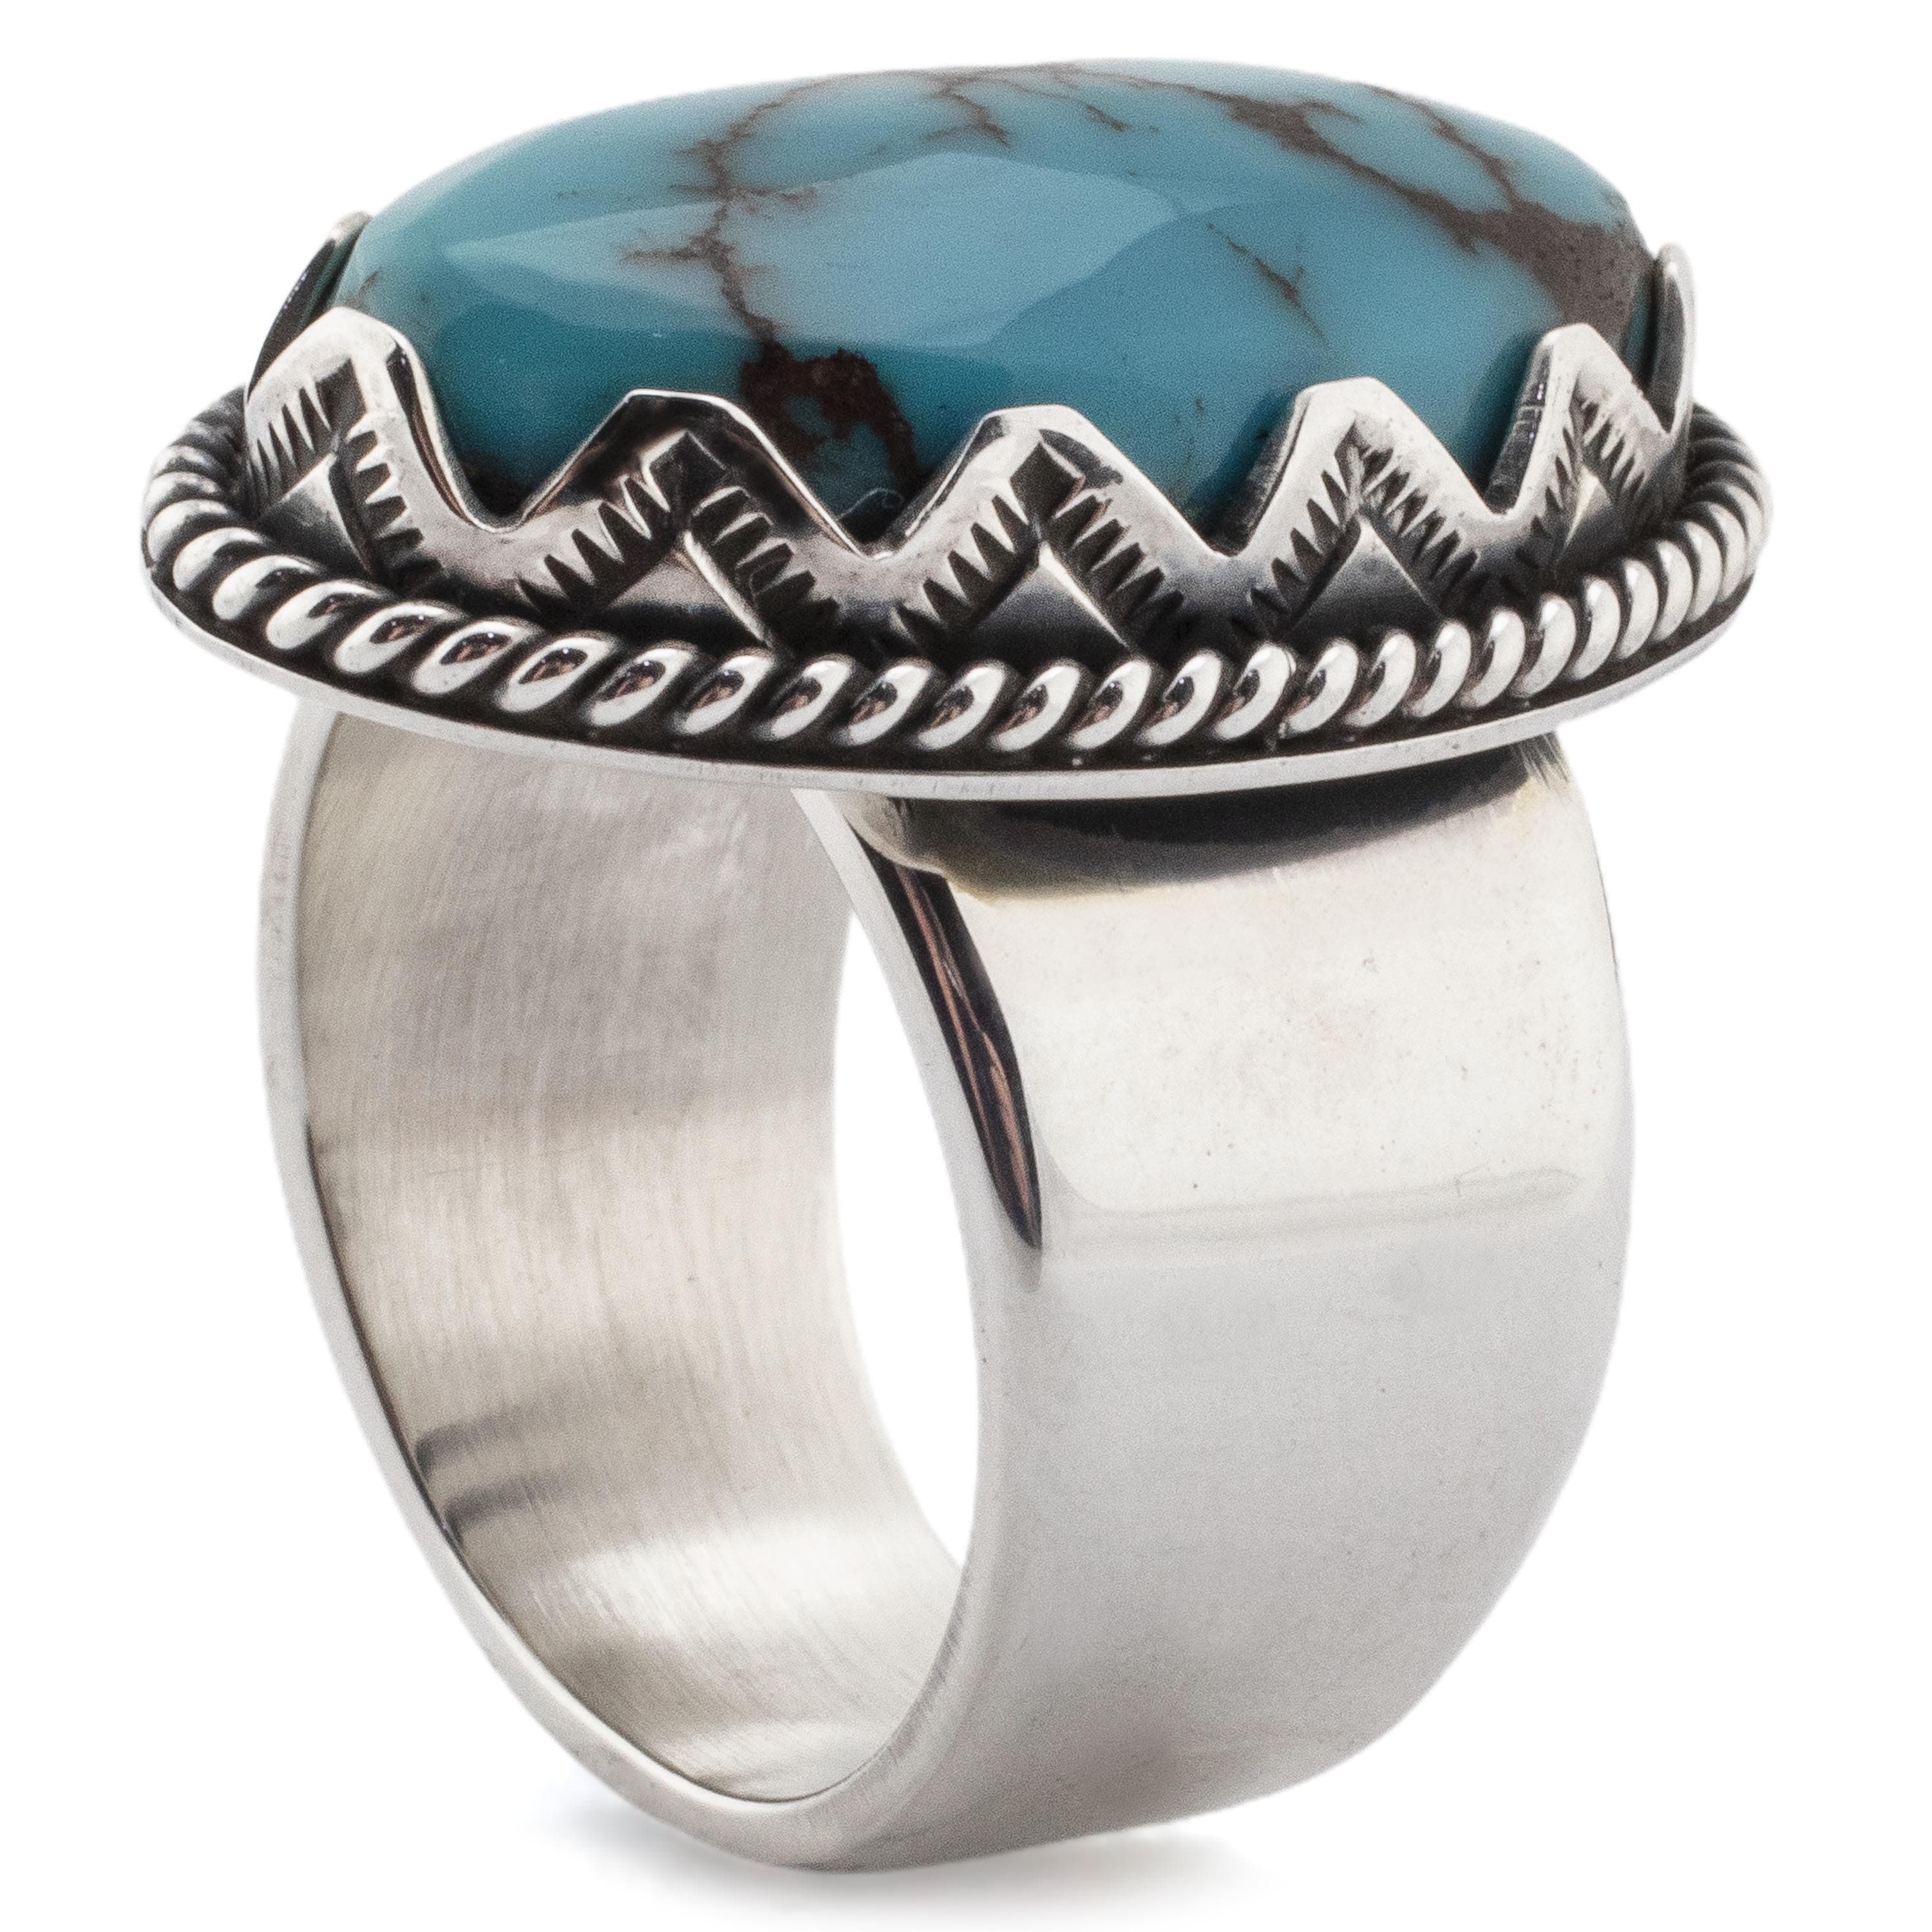 Kalifano Native American Jewelry 9 Elgin Tom Eygptian Turquoise USA Native American Made 925 Sterling Silver Ring NAR1000.009.9